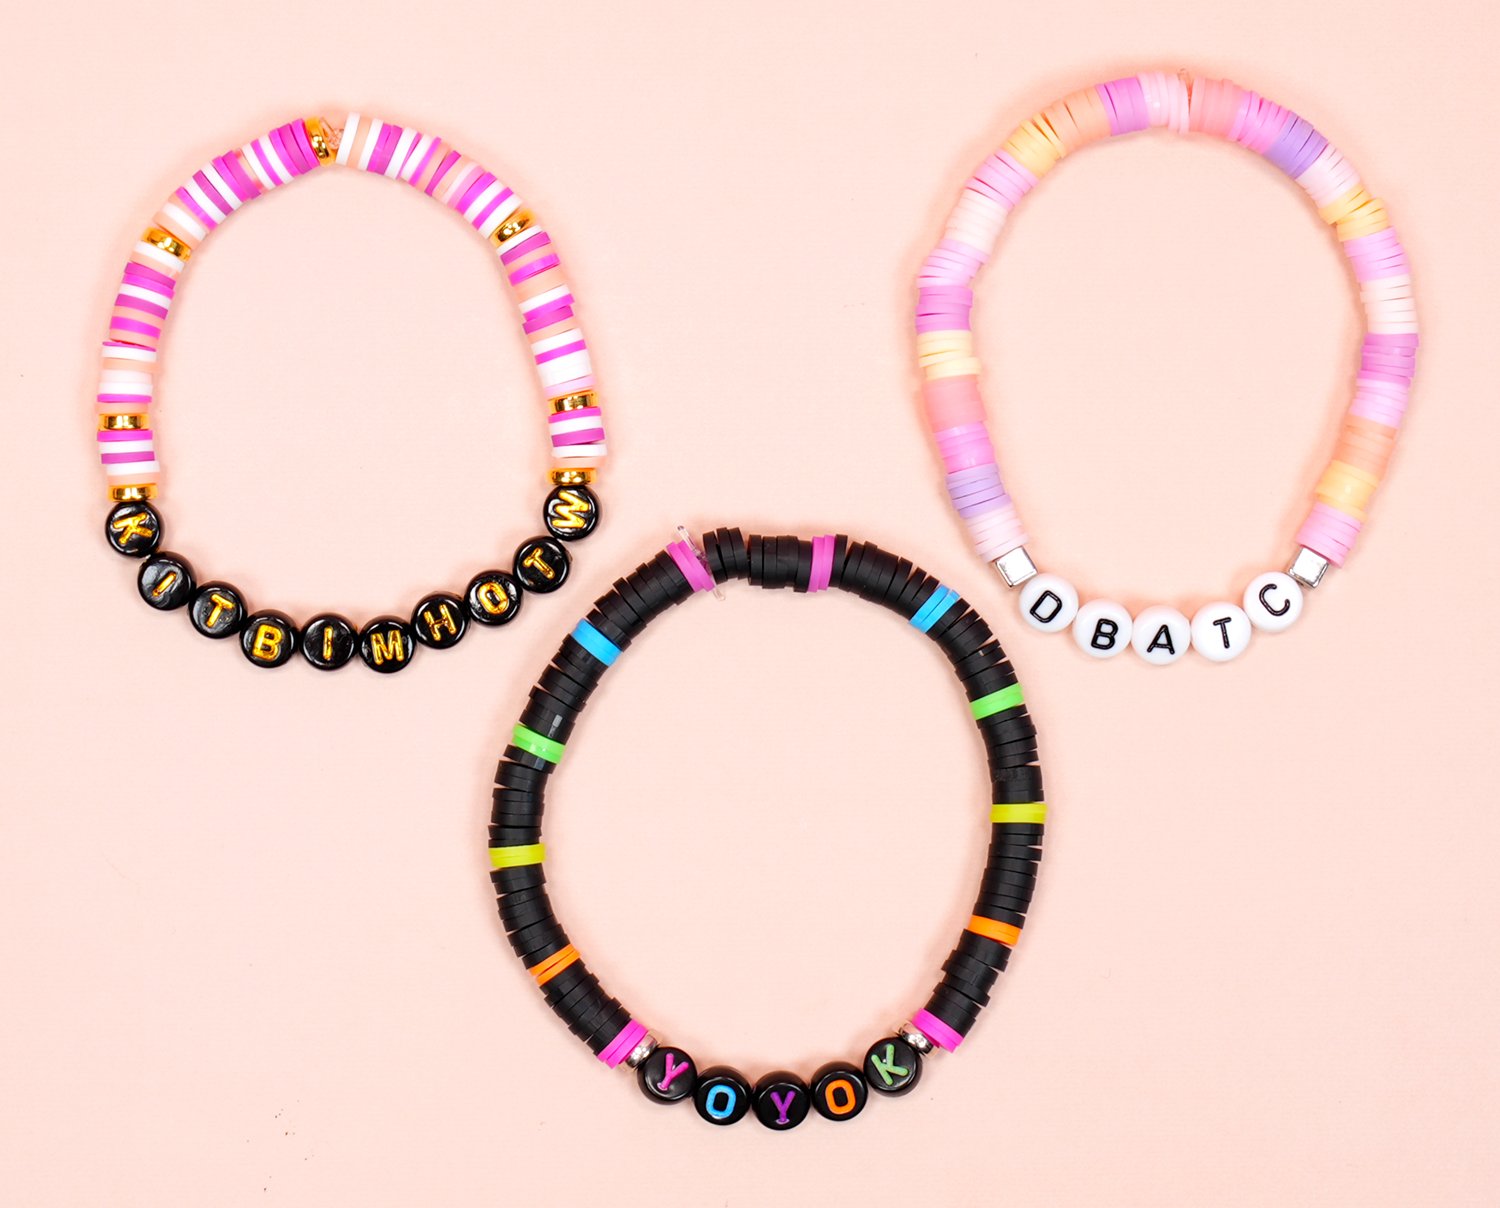 Three colorful Taylor Swift Eras Tour friendship bracelets featuring acronyms from song titles and lyrics